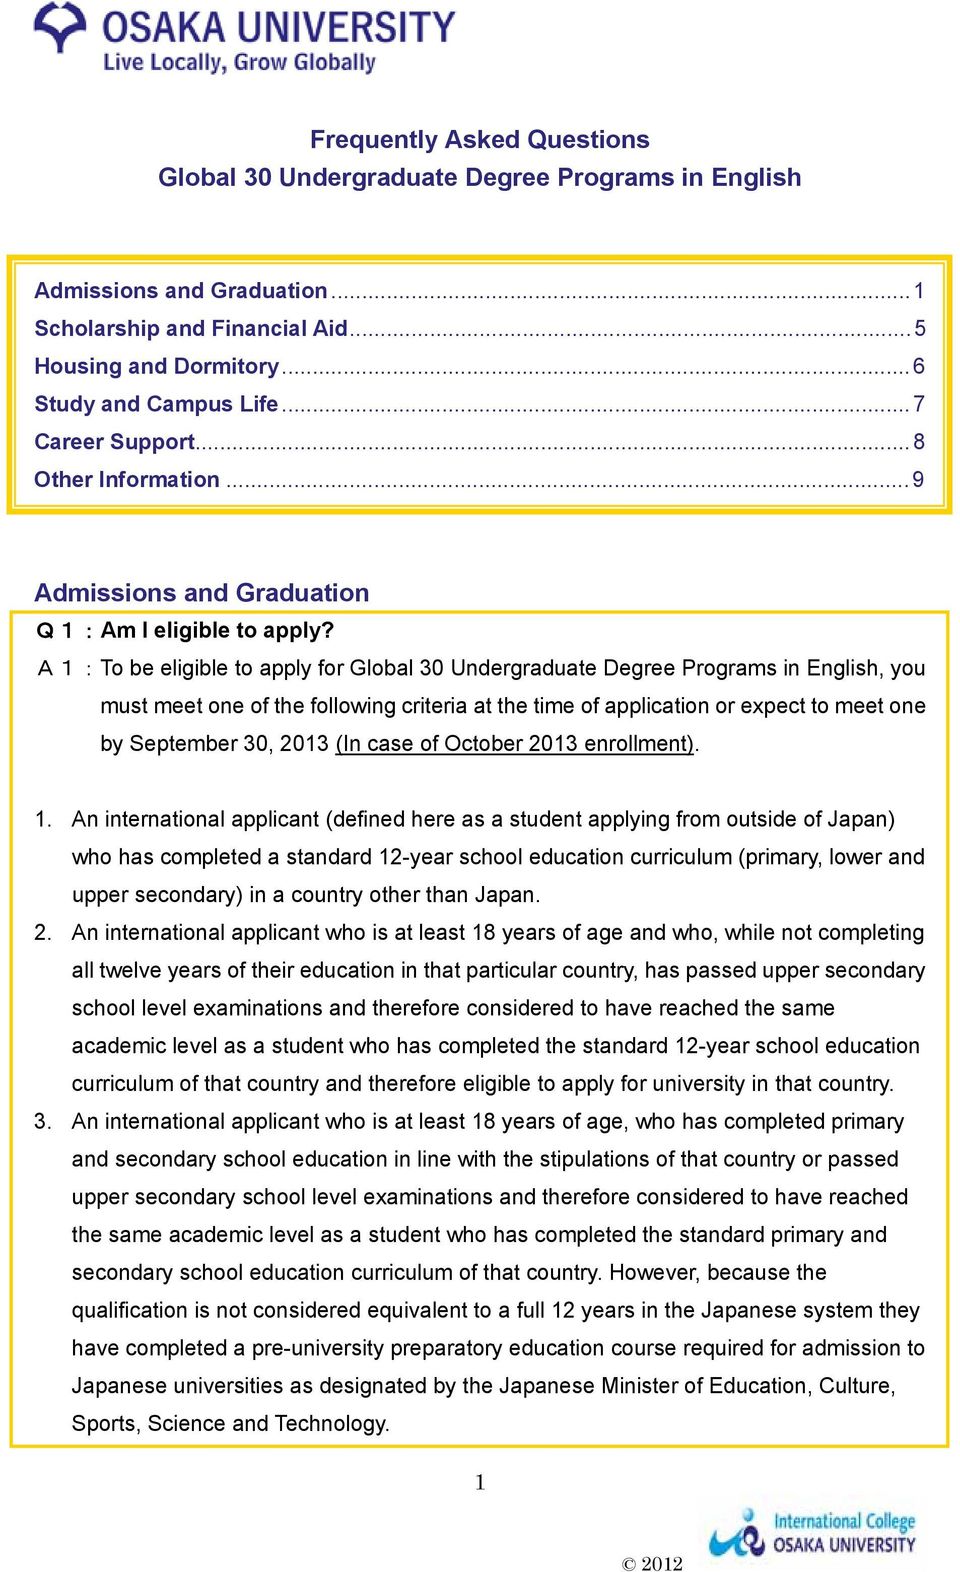 To be eligible to apply for Global 30 Undergraduate Degree Programs in English, you must meet one of the following criteria at the time of application or expect to meet one by September 30, 2013 (In